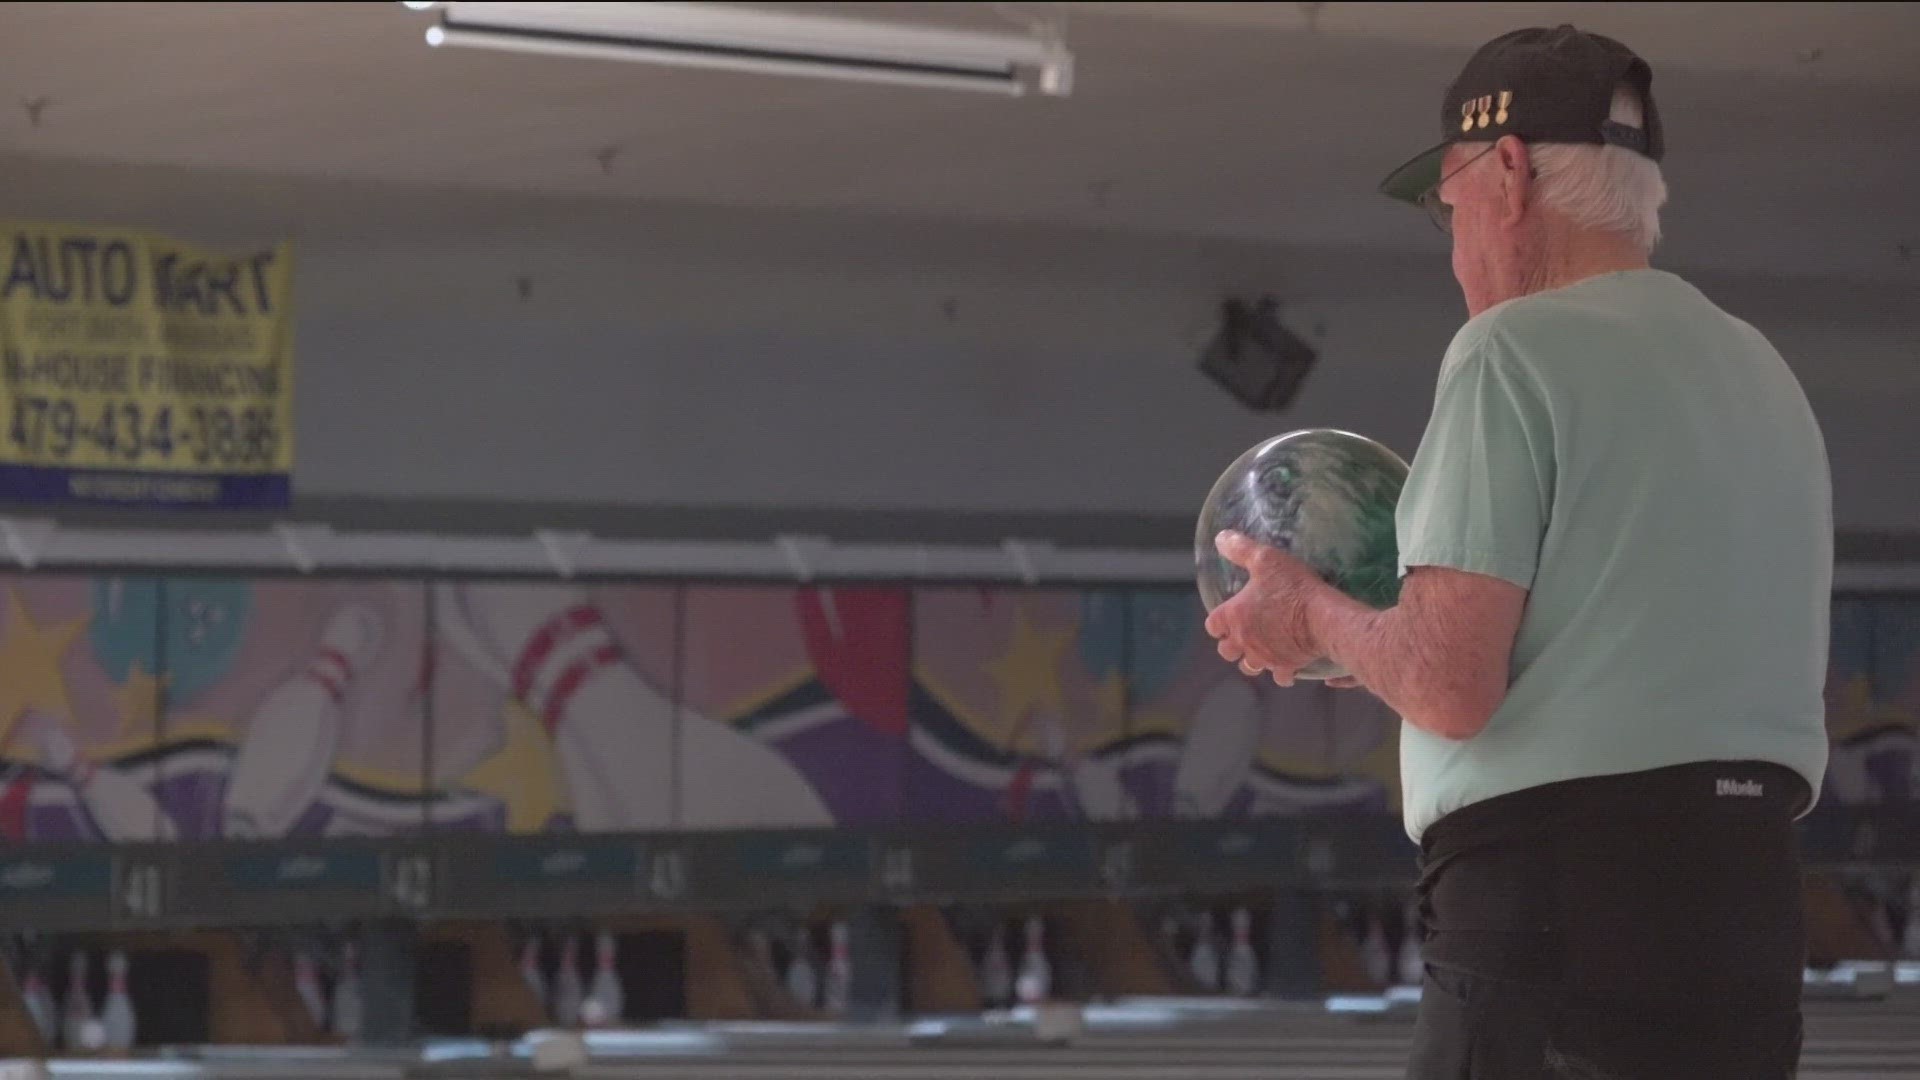 A WORLD WAR 2 VET IS AGING GRACEFULLY...AND HAVING FUN DOING IT...